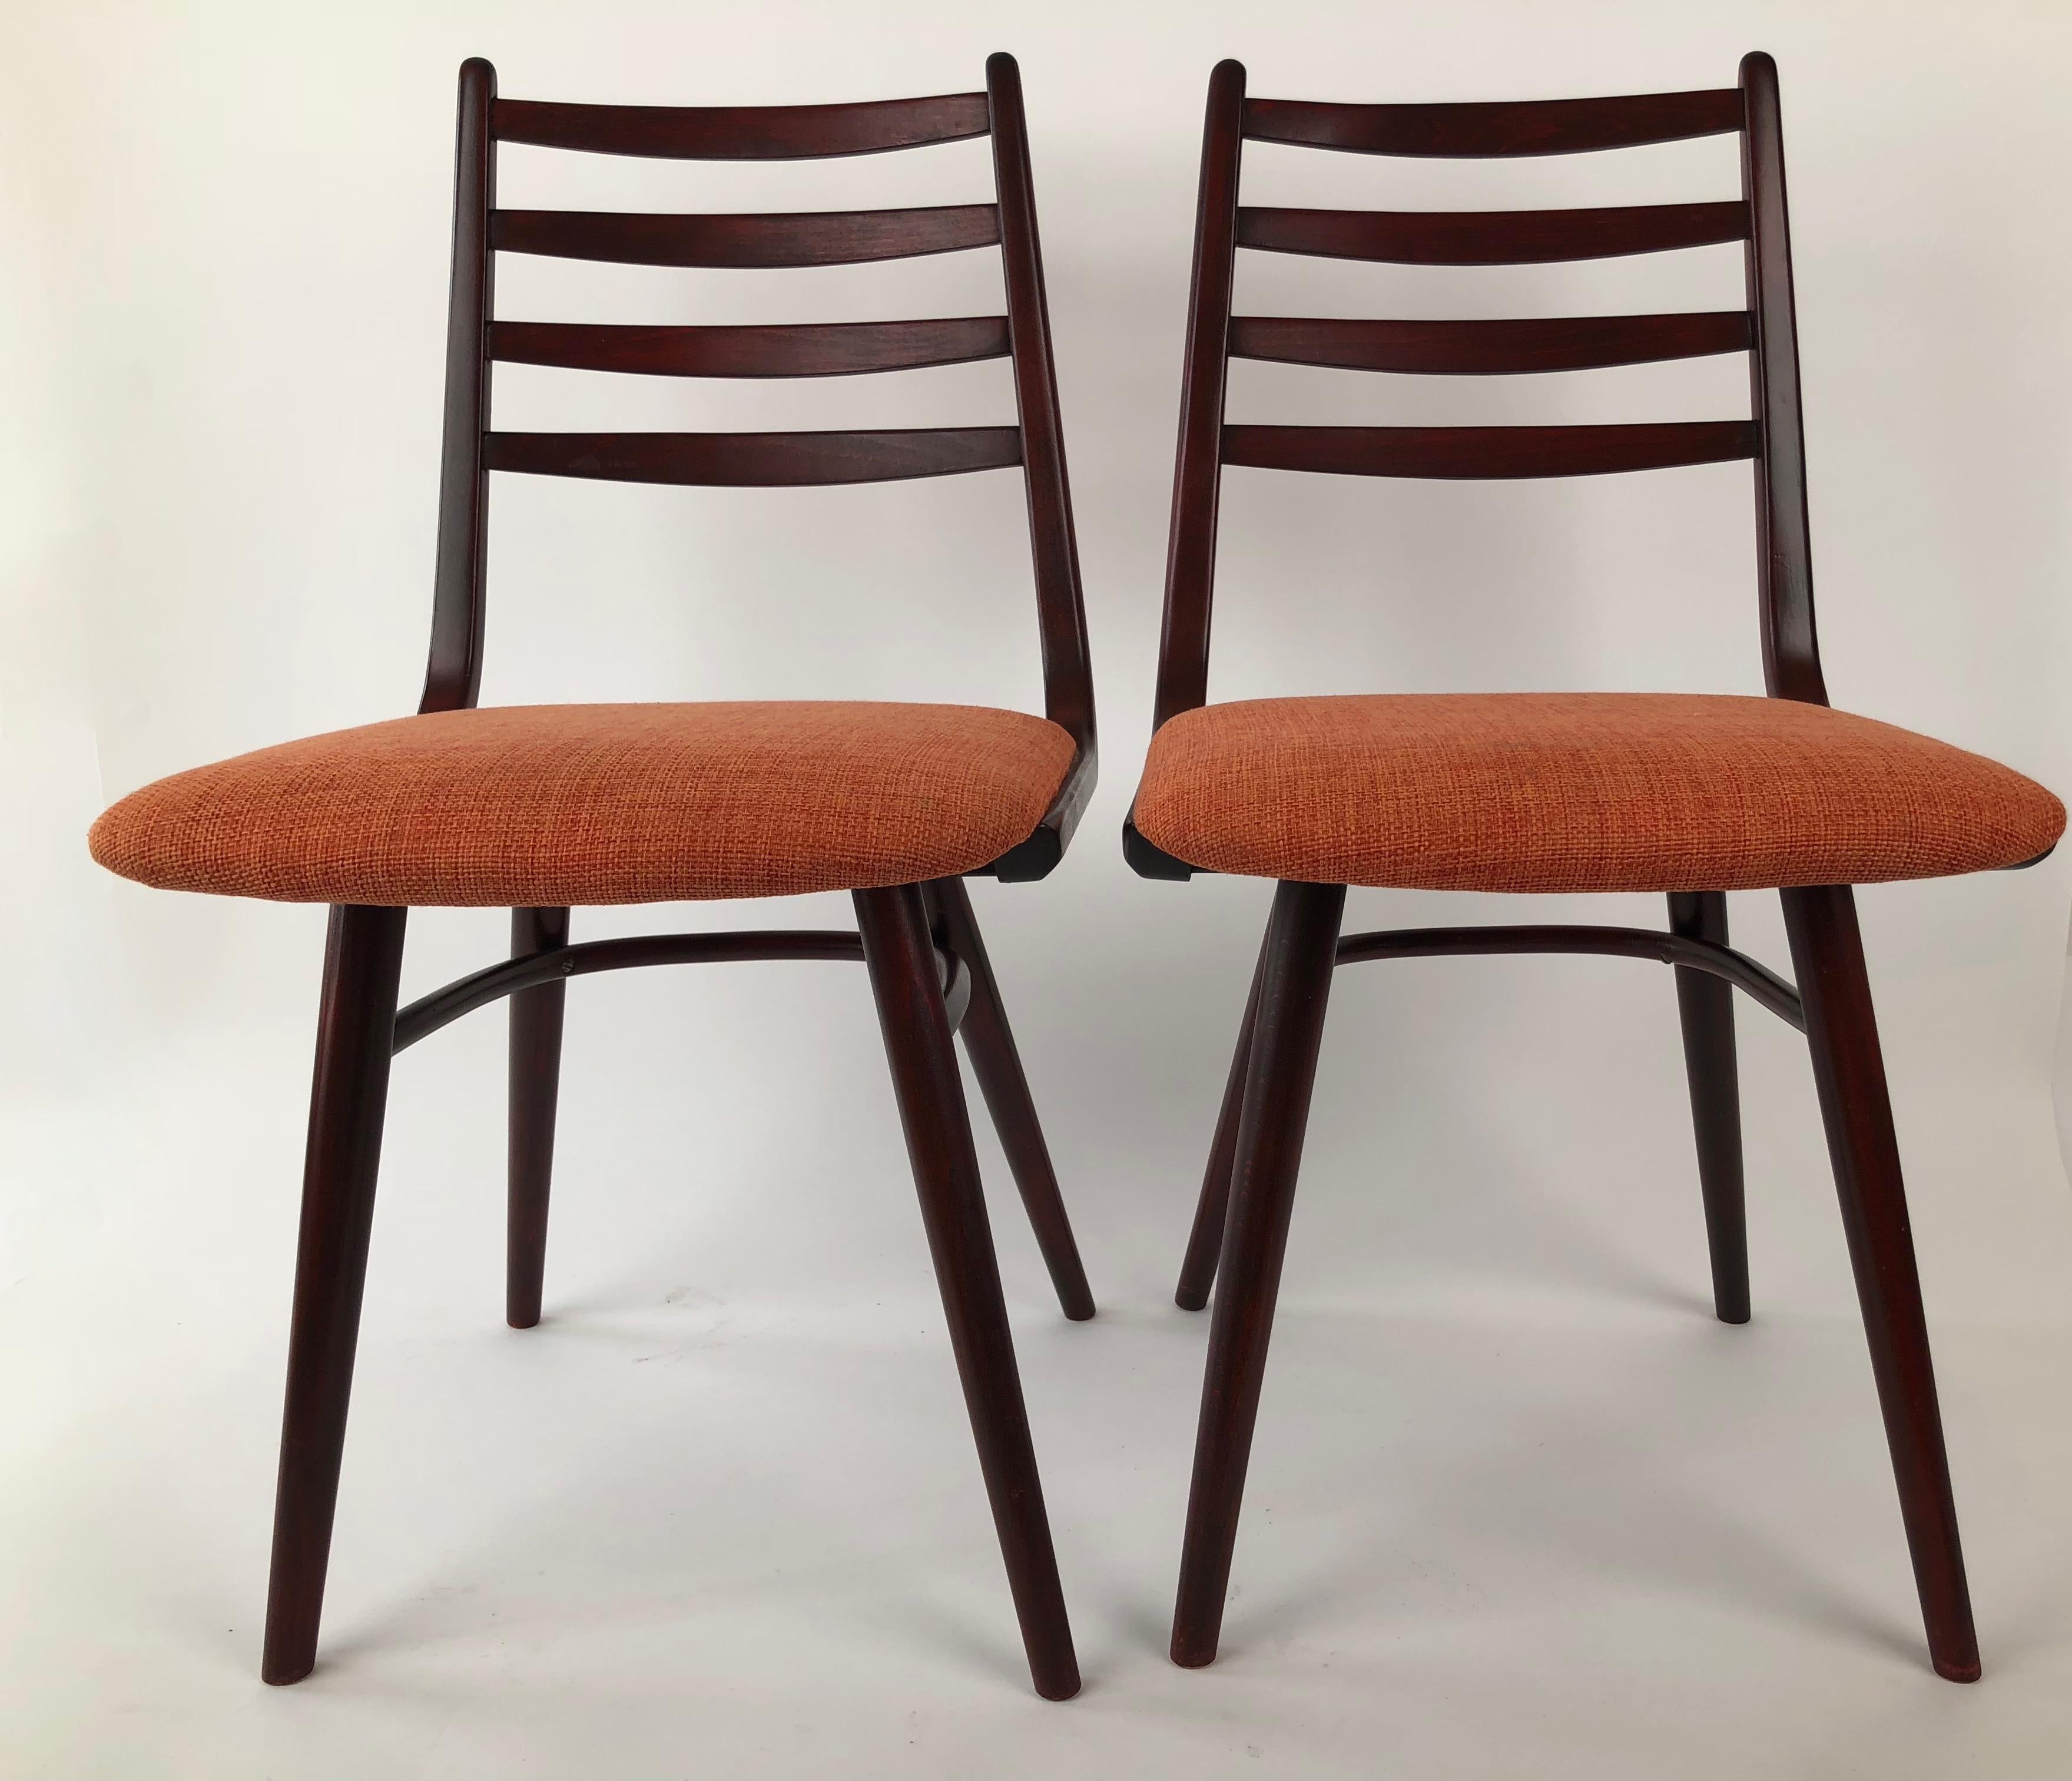 Set of 4 Dinning Chairs, 1970's, Thonet Factory For Sale 3